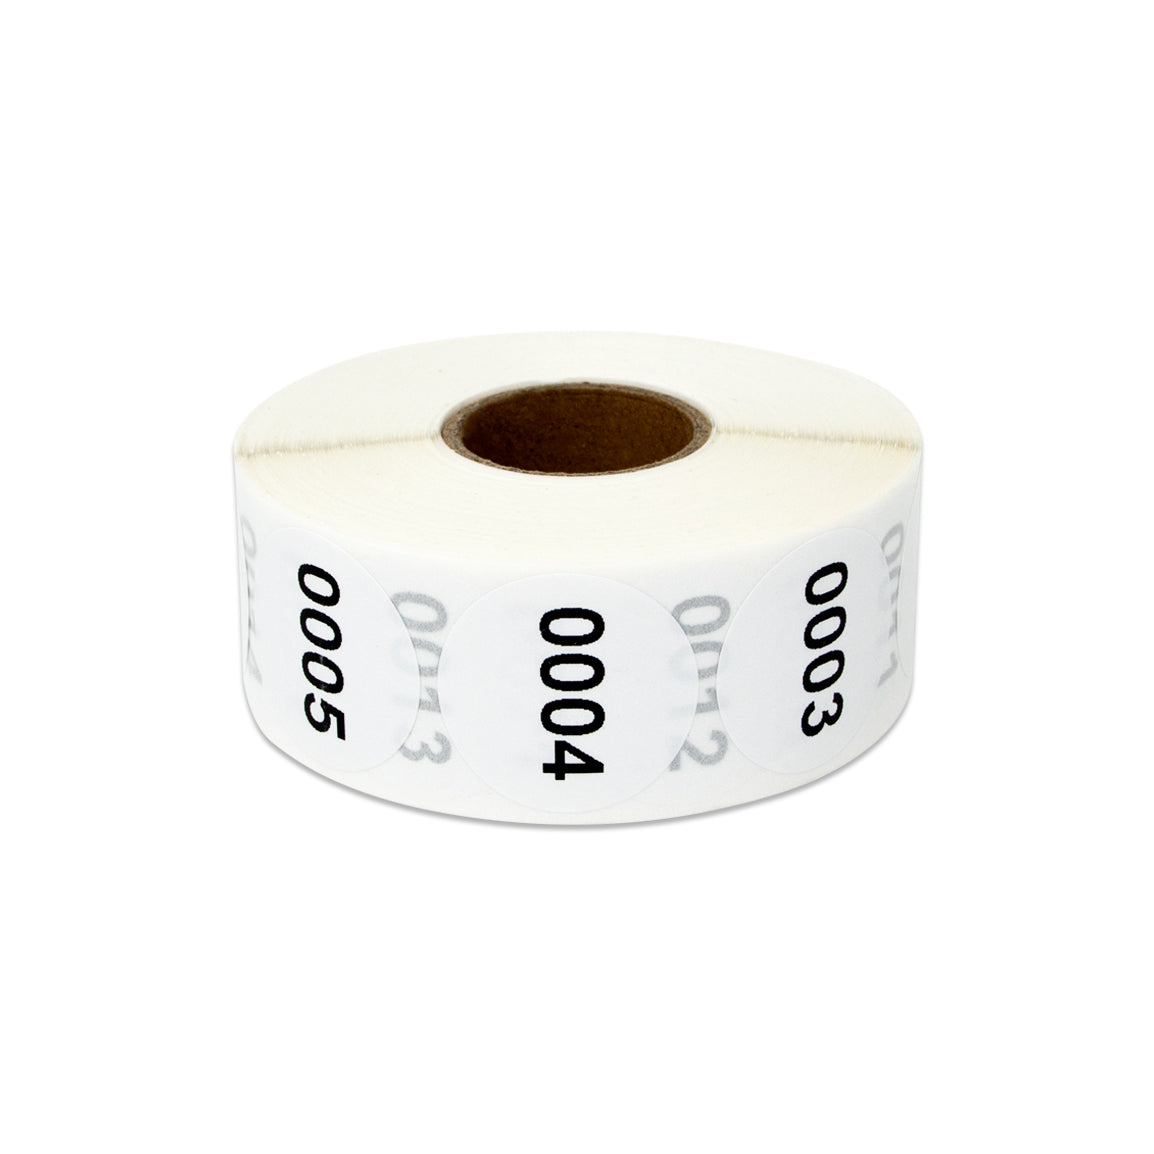 1 inch | Inventory: Consecutive Numbers "0001 to 1000" Stickers